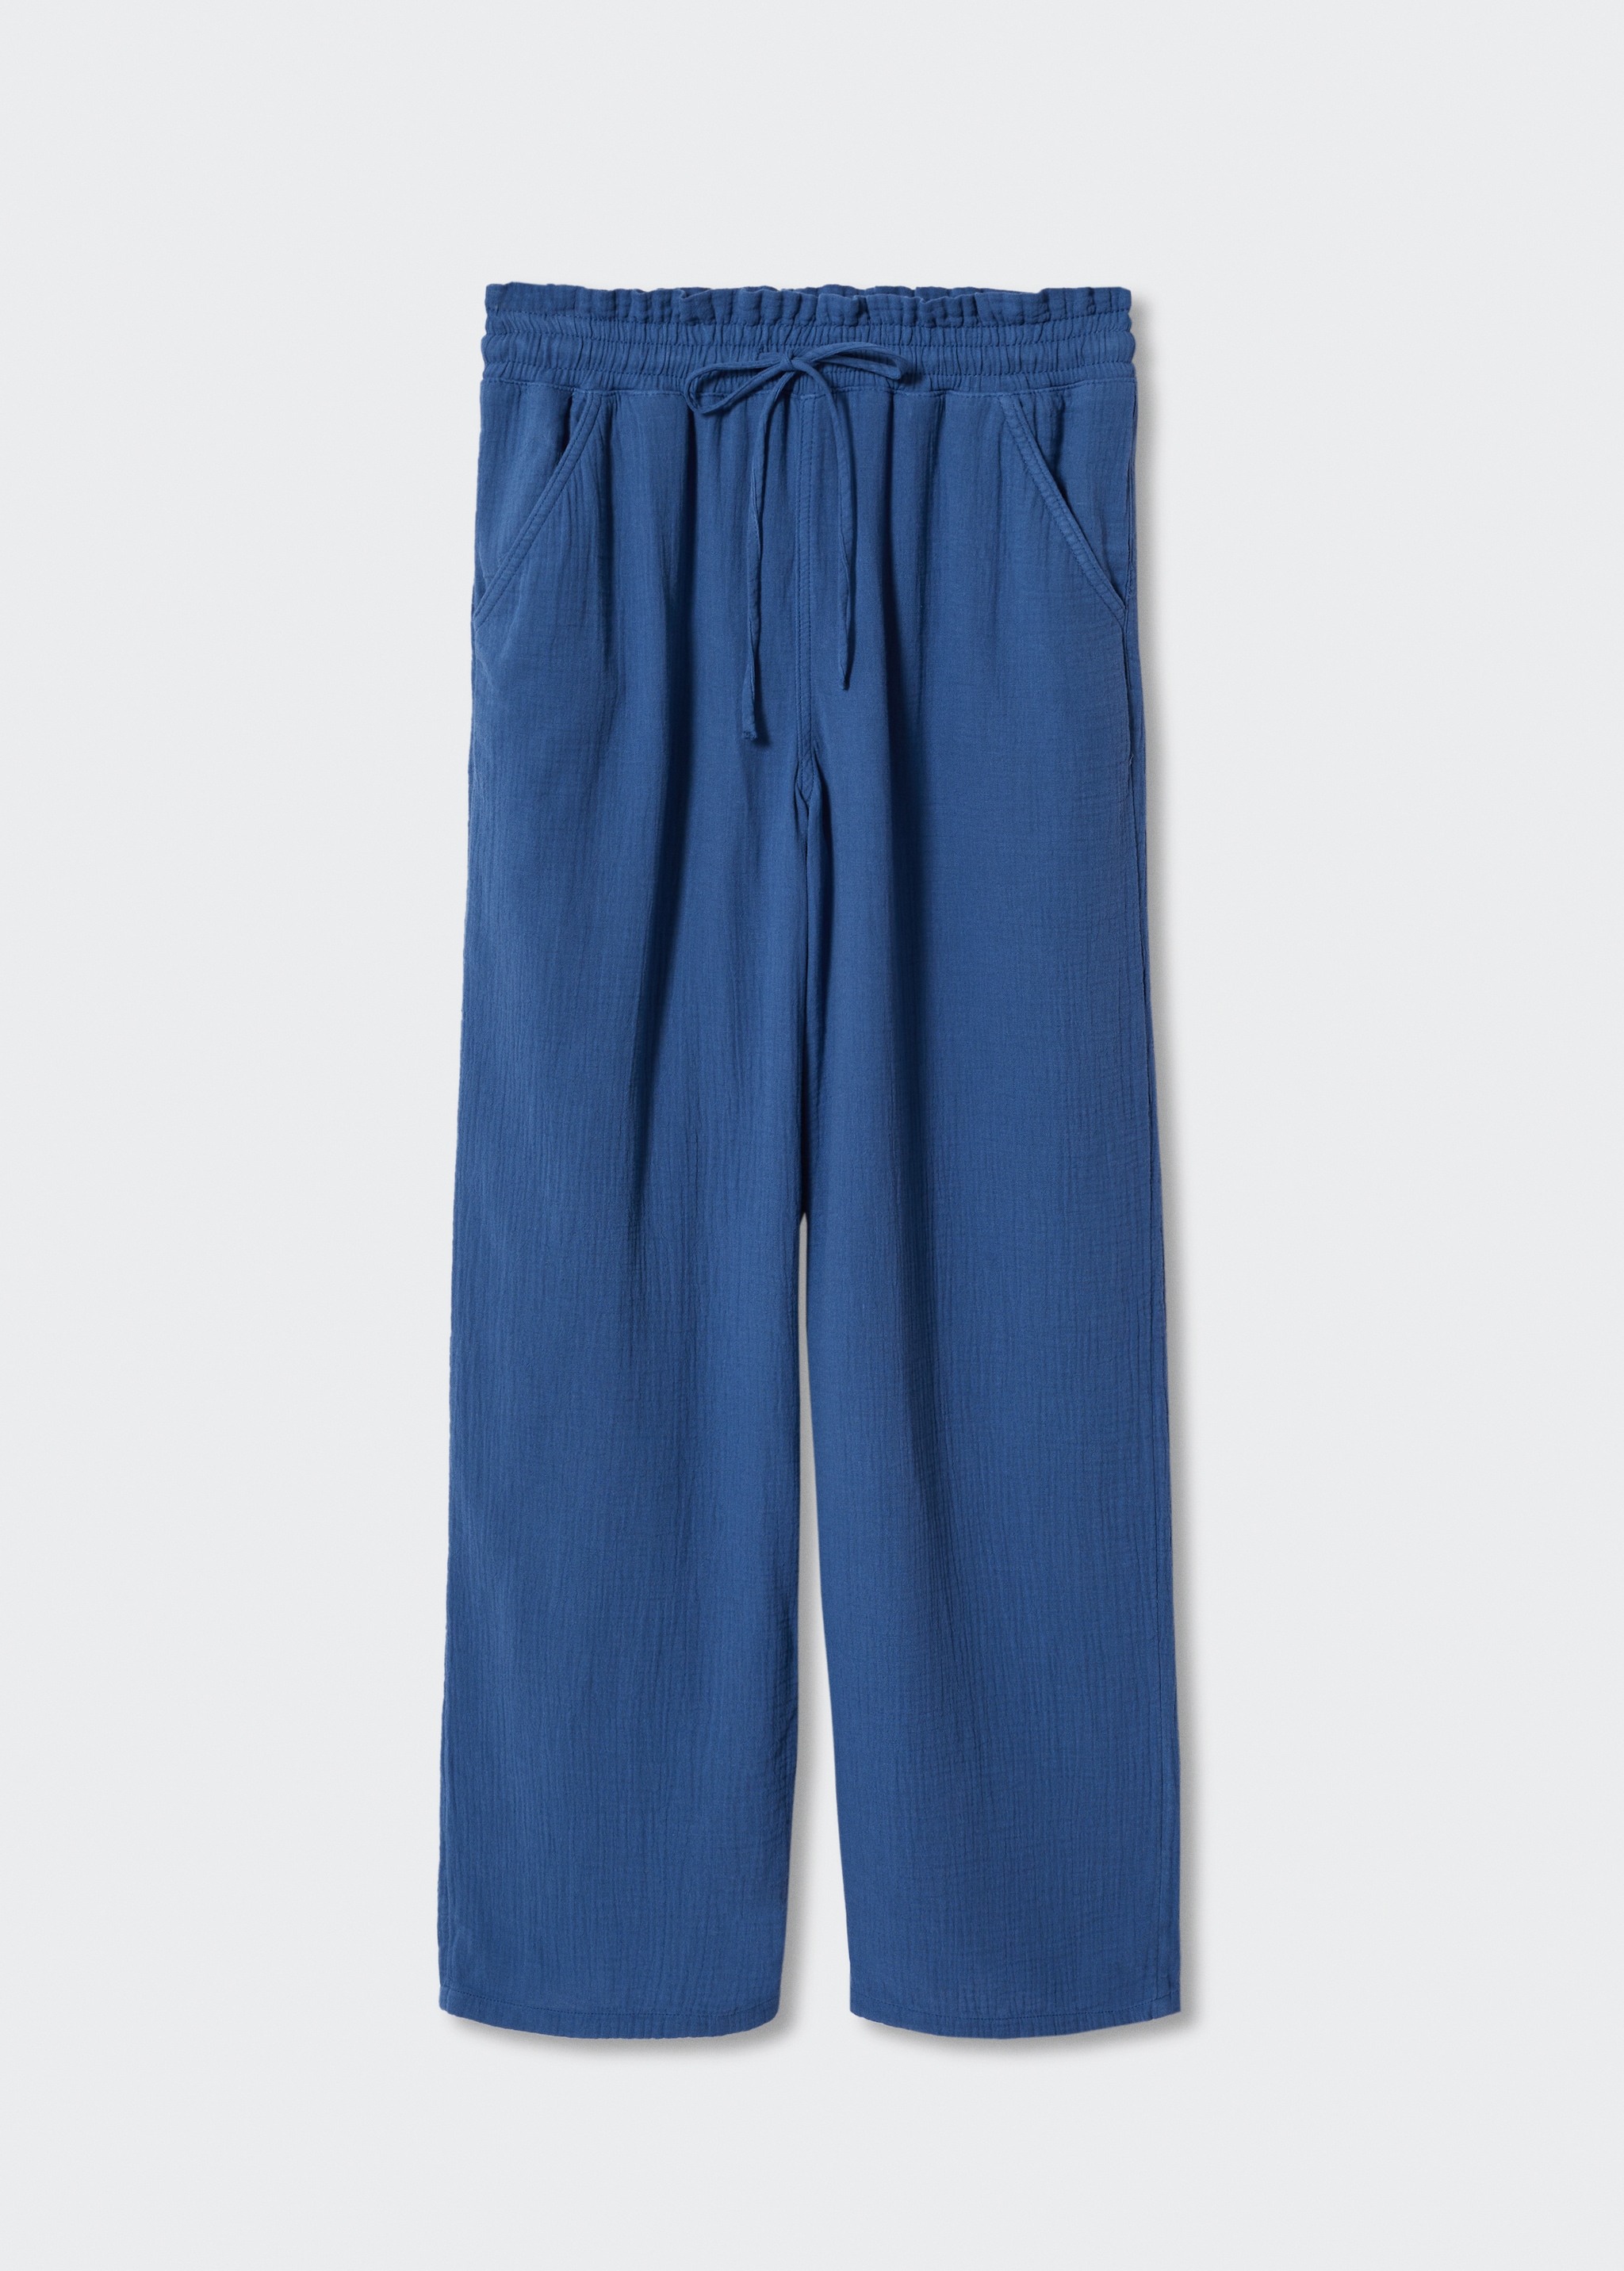 Bambula cotton trousers - Article without model